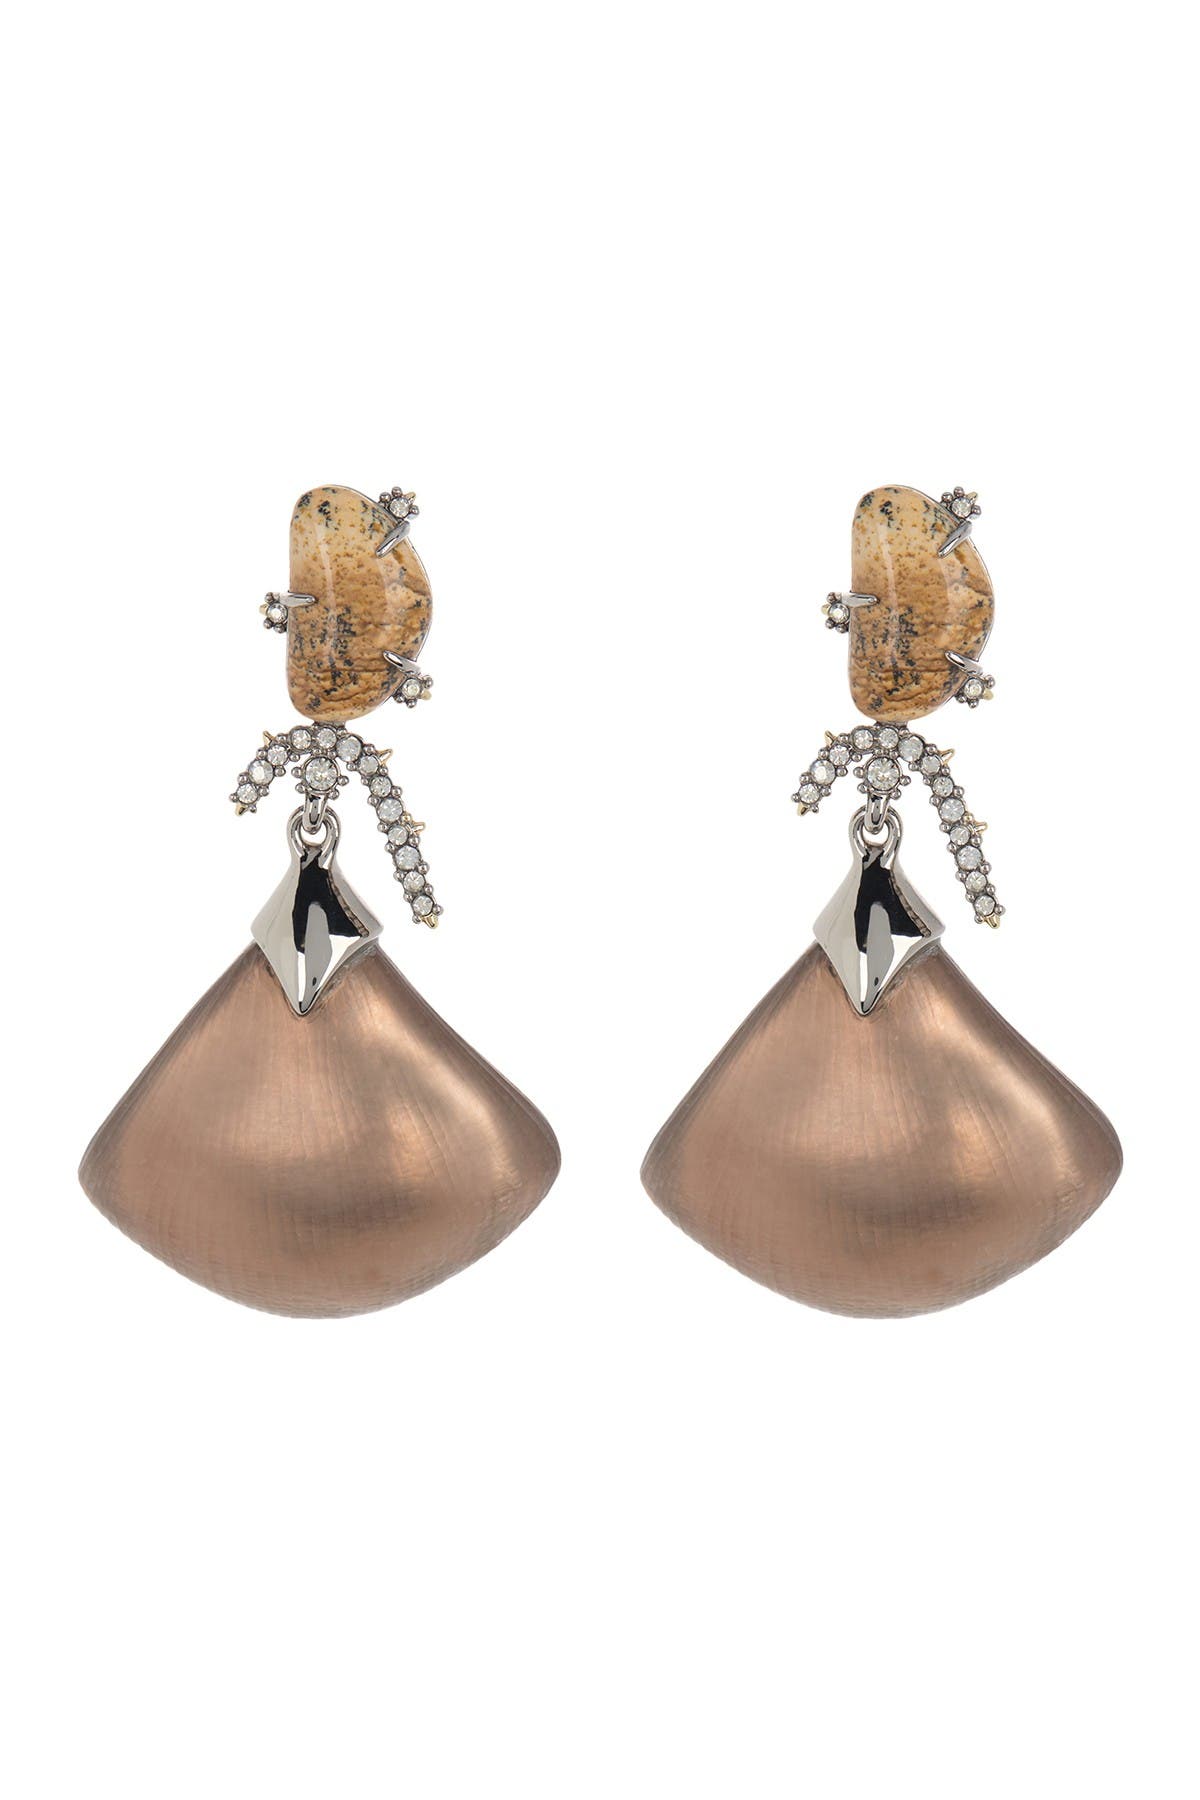 Alexis Bittar Fan Earrings W/ Pave Stone Detailing In Charcoal Brown